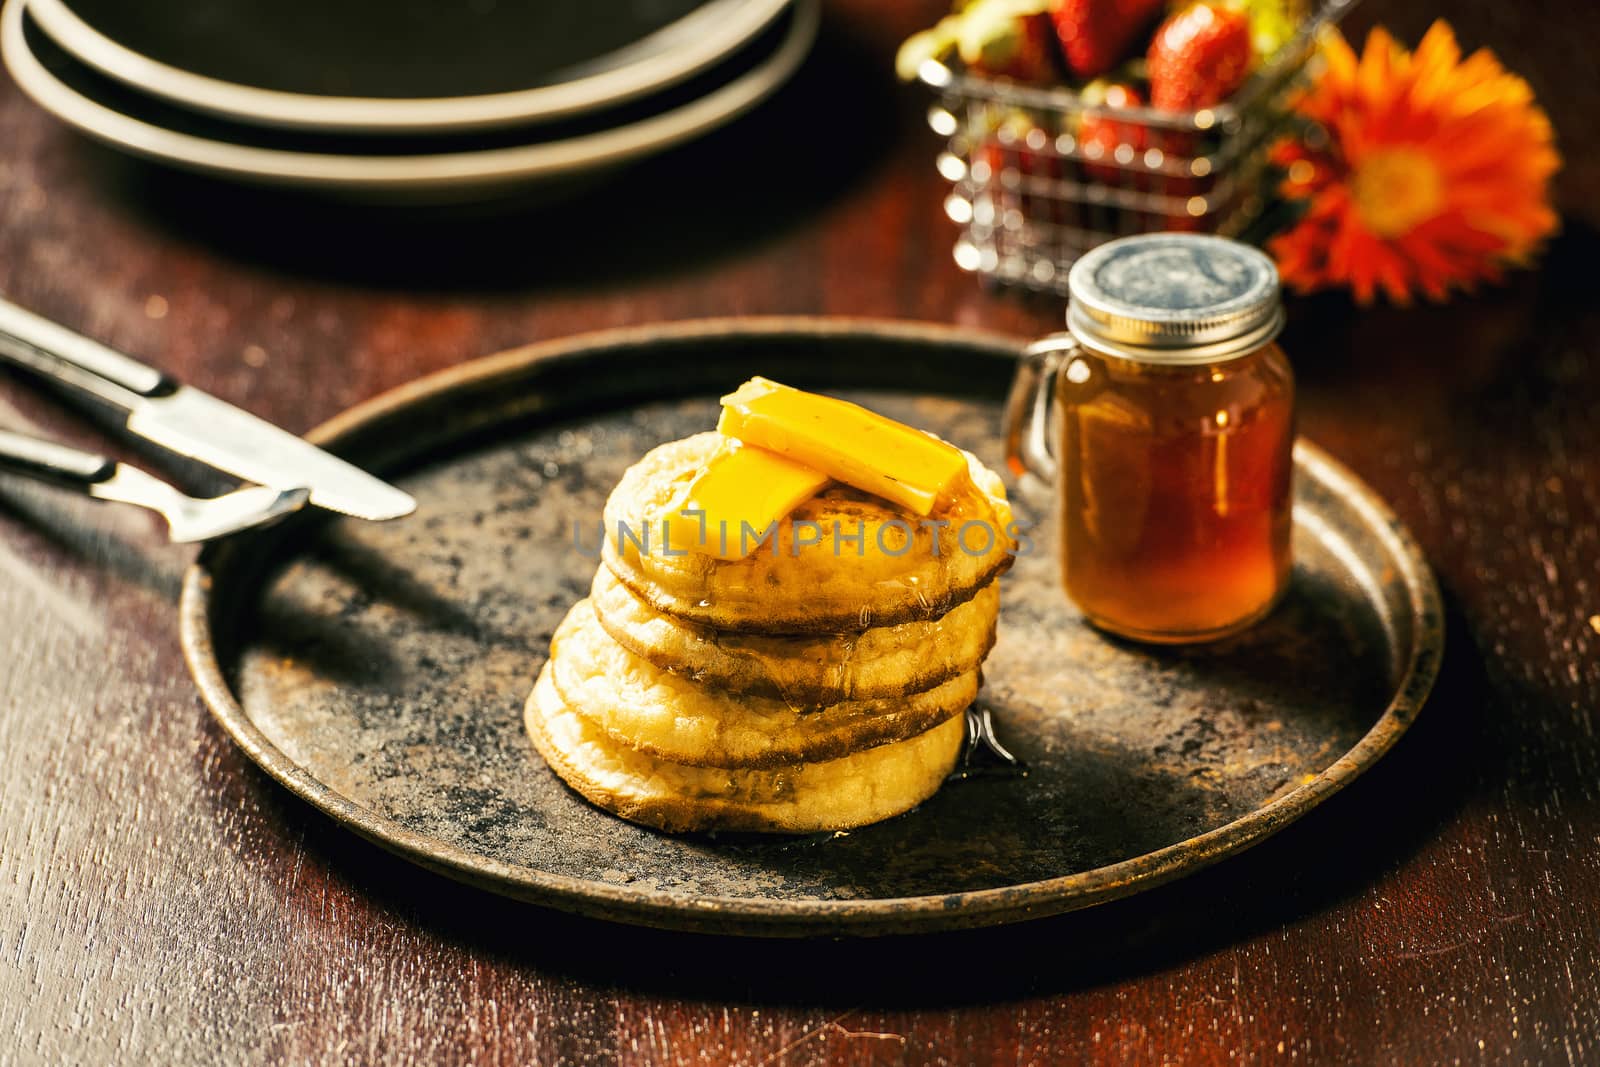 Toasted crumpets with honey drizzled over them and strawberries in the background.